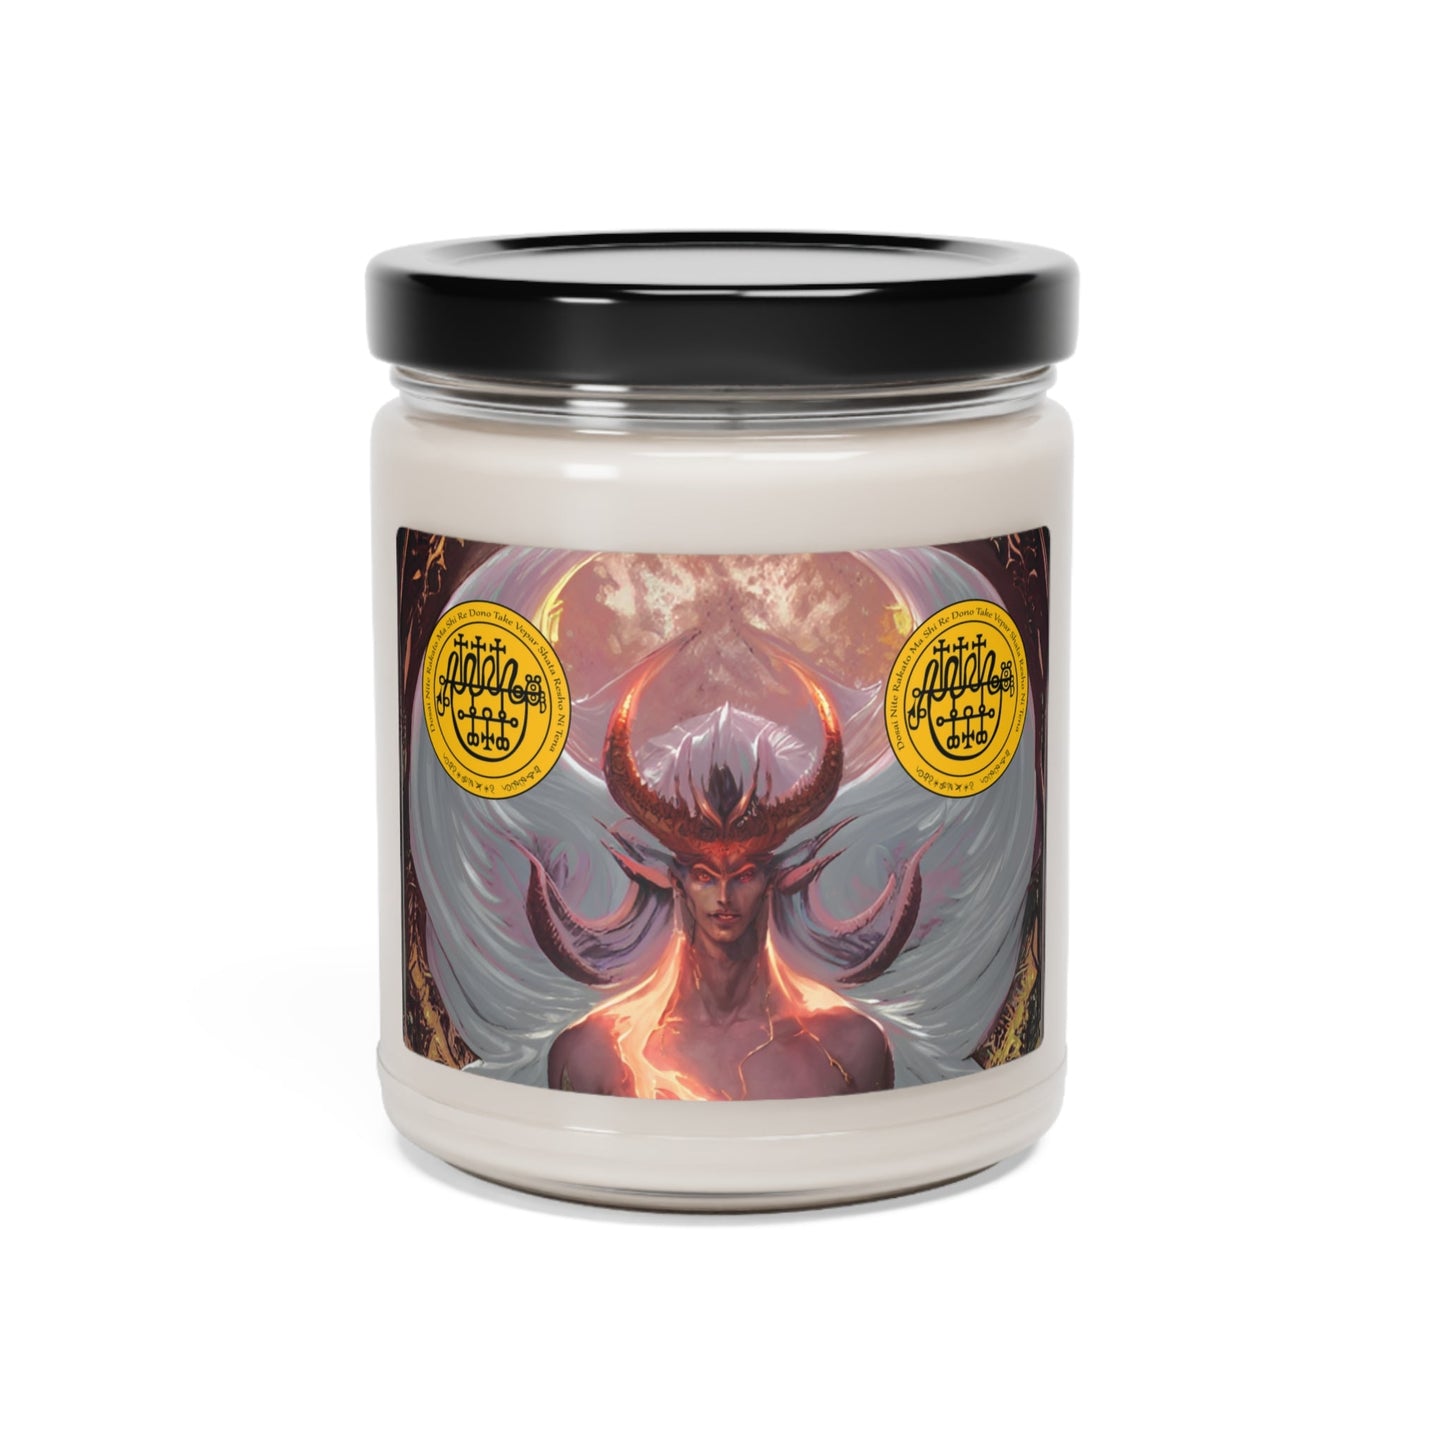 Demon-Vepar-Altar-Scented-Soy-Candle-for-offerings-rituals-initiations-o-praying-and-medtation